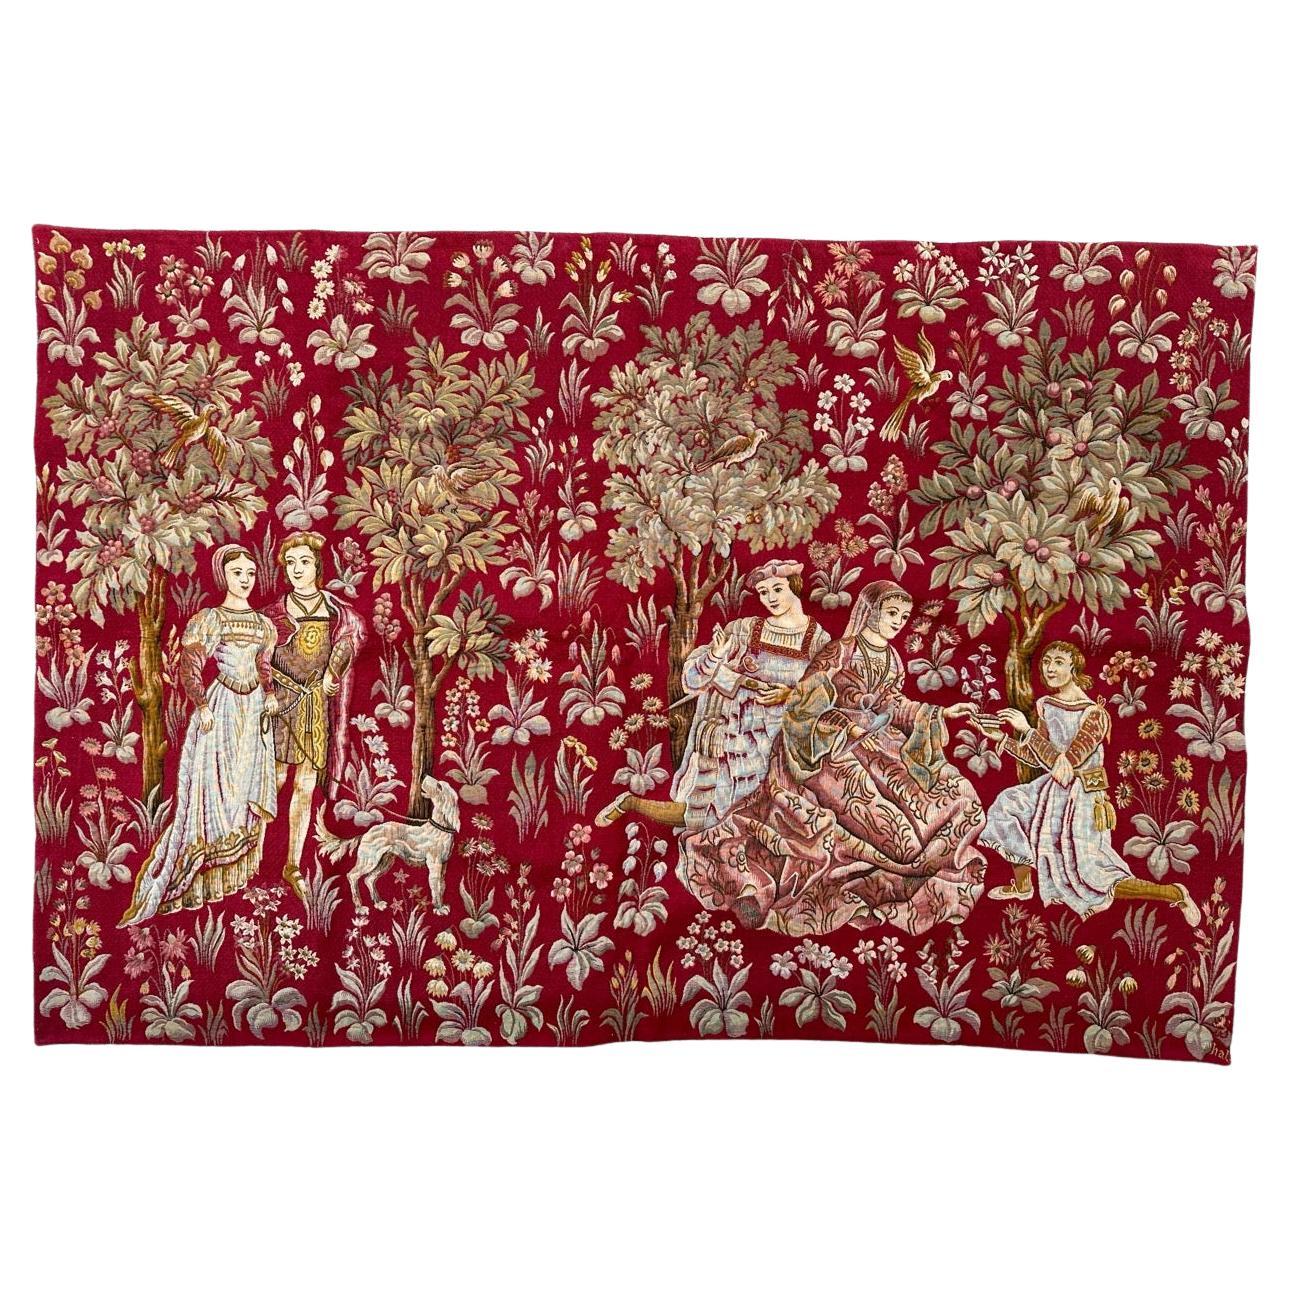 Bobyrug's Pretty Jaquar Tapestry Aubusson Museum Style Medieval Design